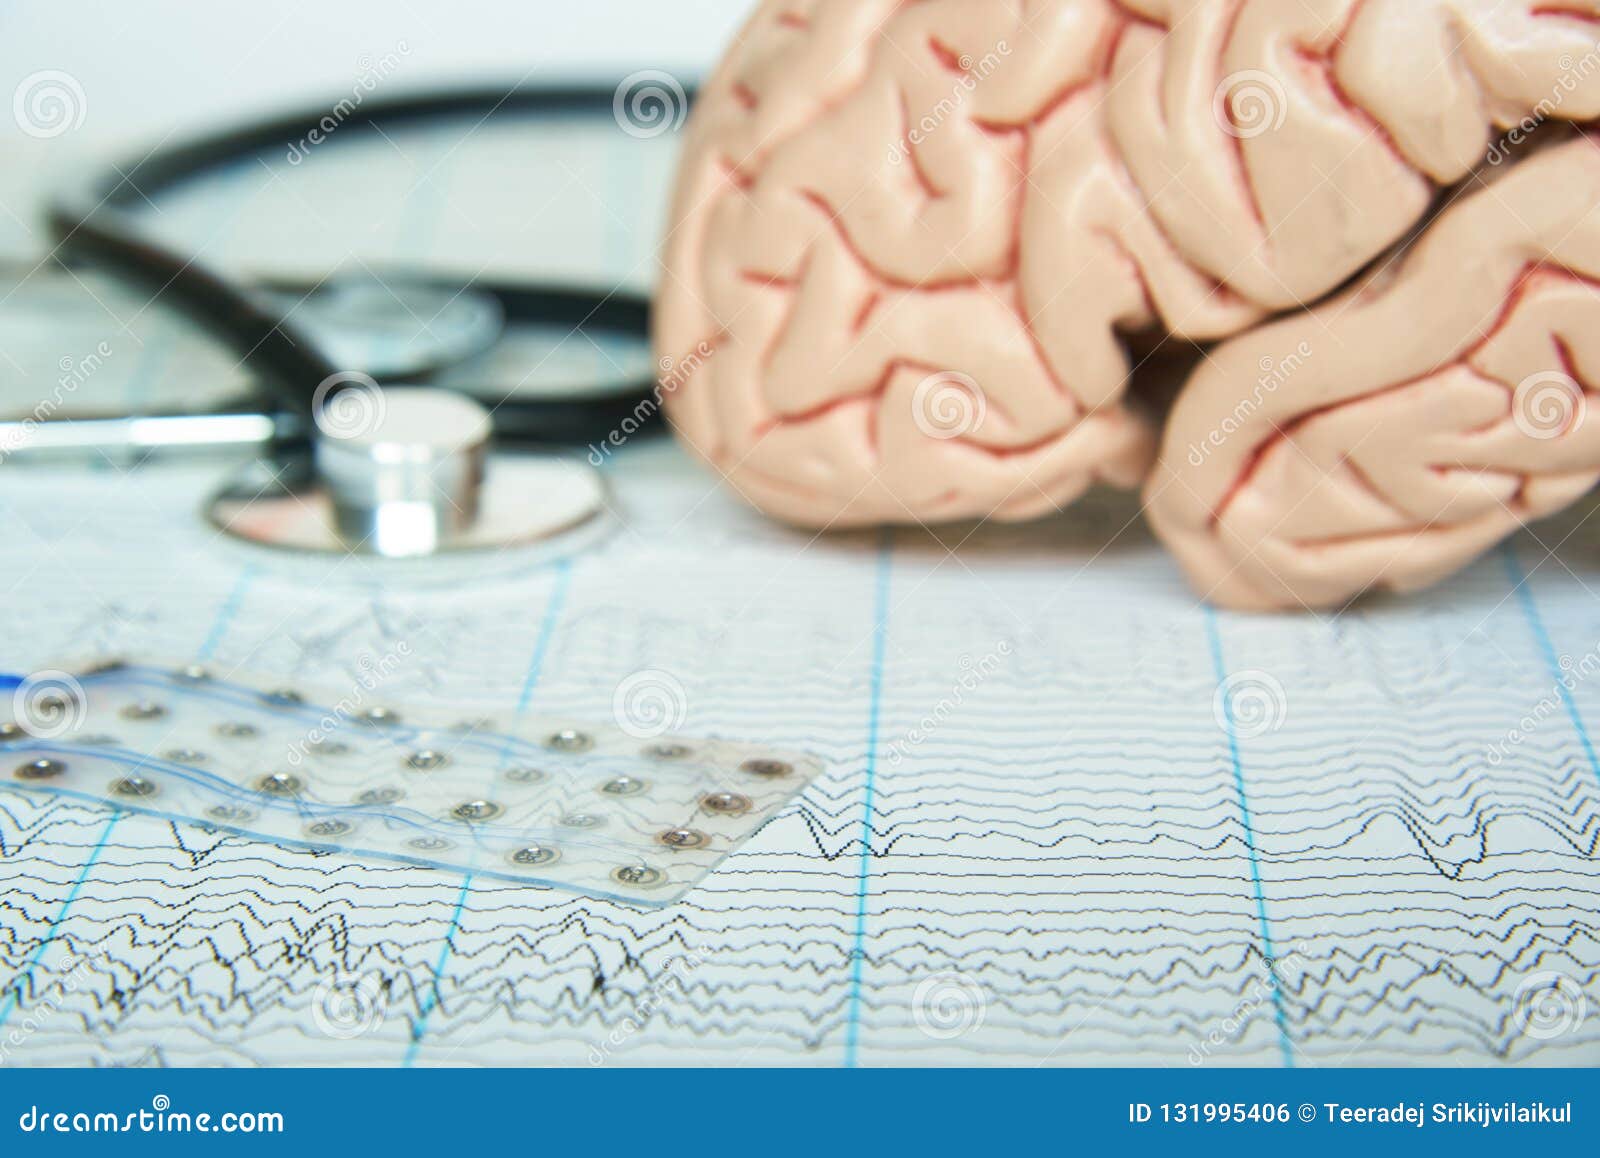 Electrode Recording Brain Waves On EEG Paper Stock Photography ...